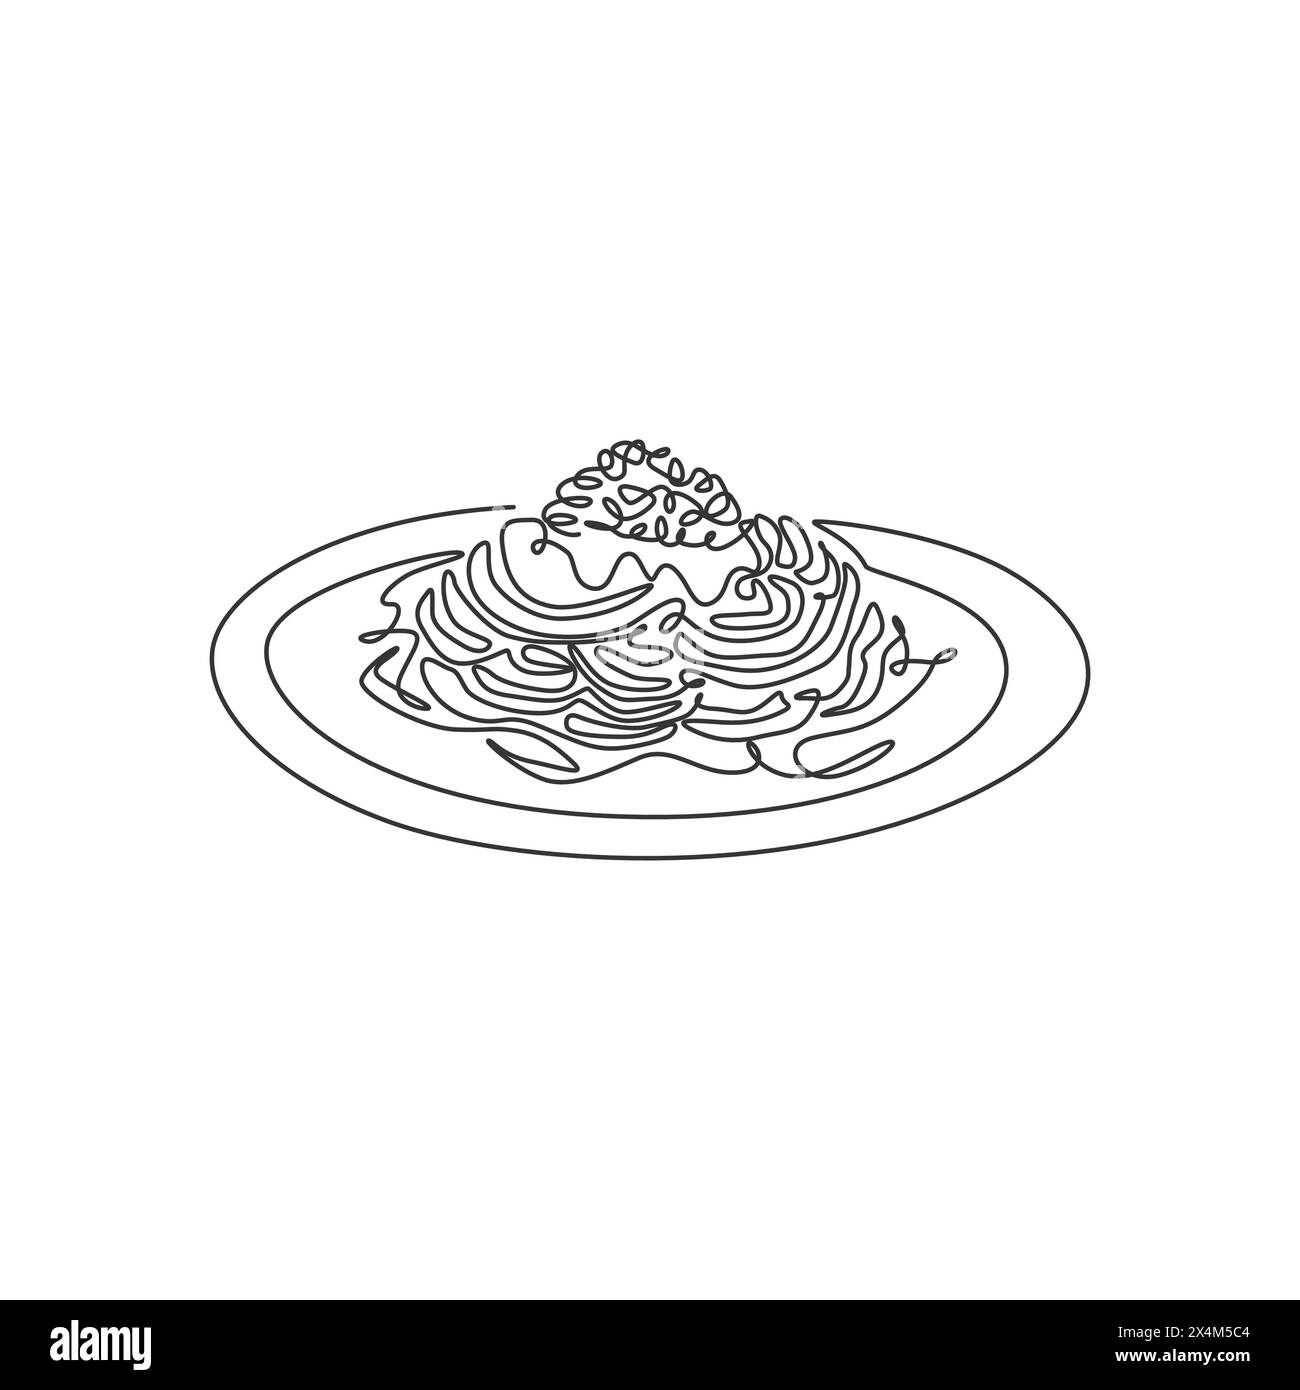 Single continuous line drawing of stylized Italian spaghetti logo label. Italy pasta noodle restaurant concept. Modern one line draw design vector ill Stock Vector